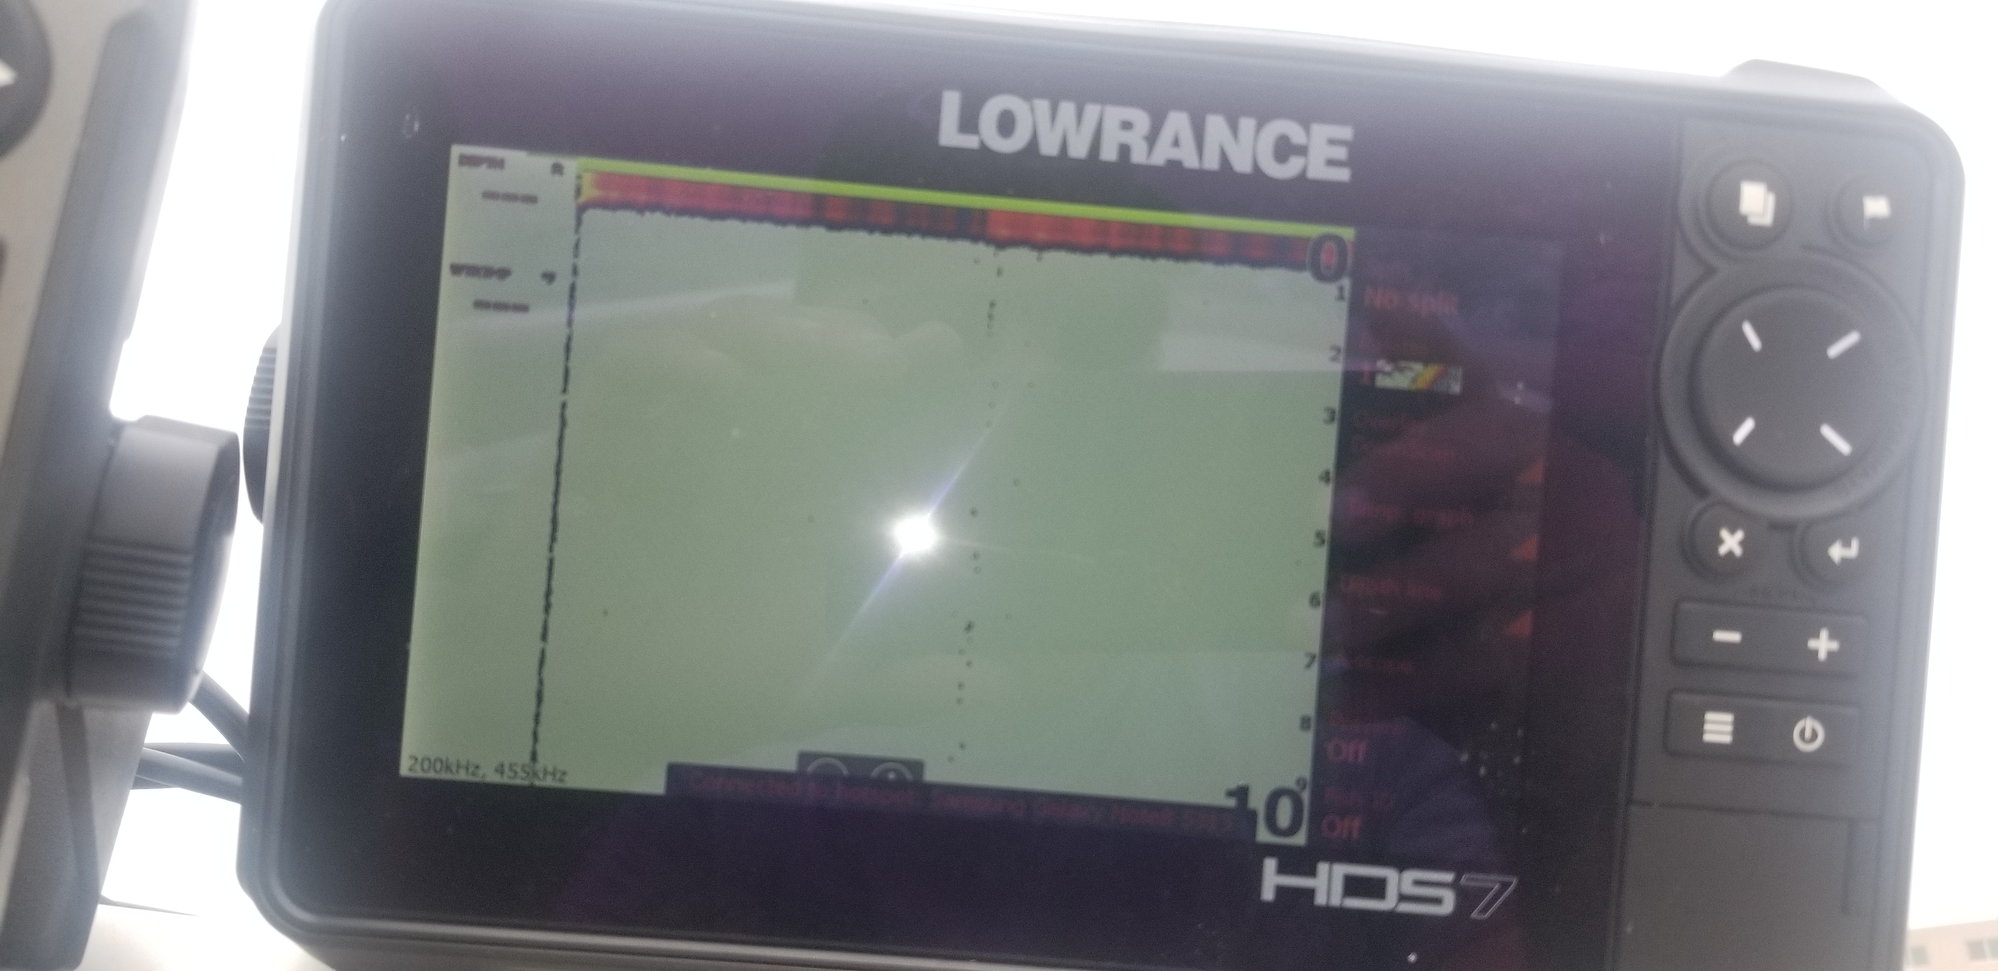 Unhappy with Lowrance gen3(9 and7) with 3D and HDI 83/200 455/800 Sonar -  Page 2 - The Hull Truth - Boating and Fishing Forum